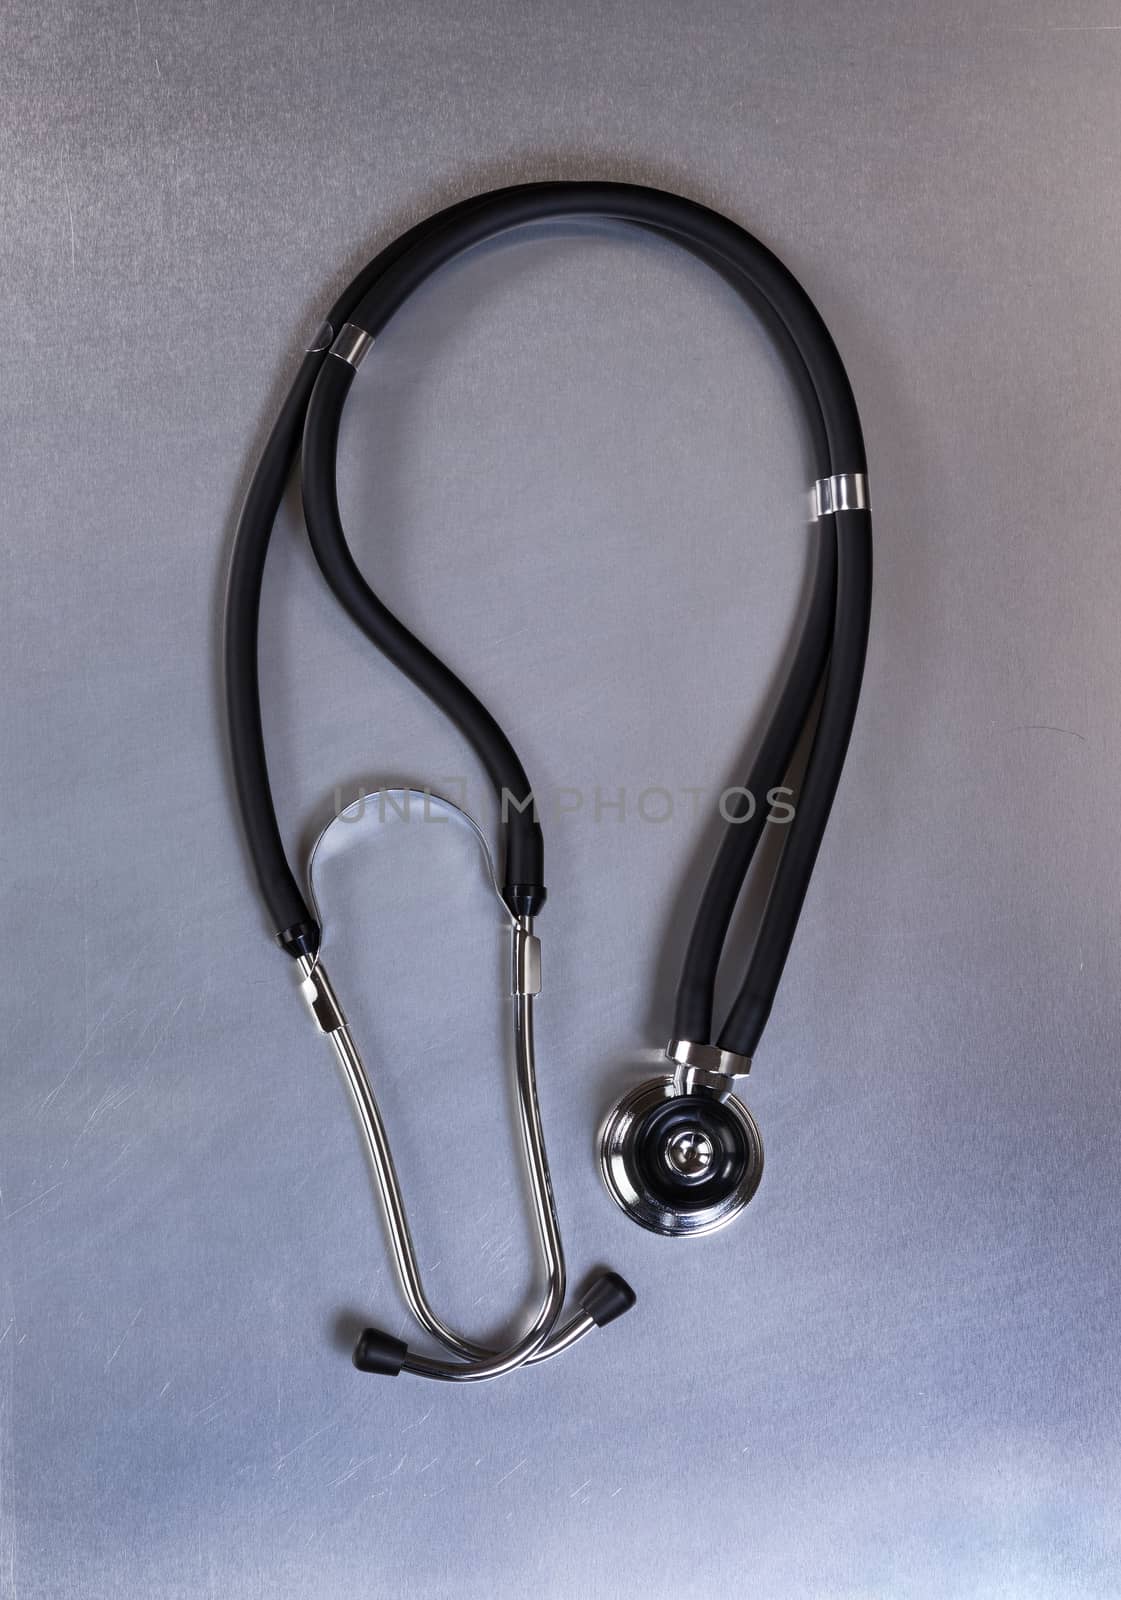 Medical stethoscope on stainless steel table in vertical layout  by tab1962